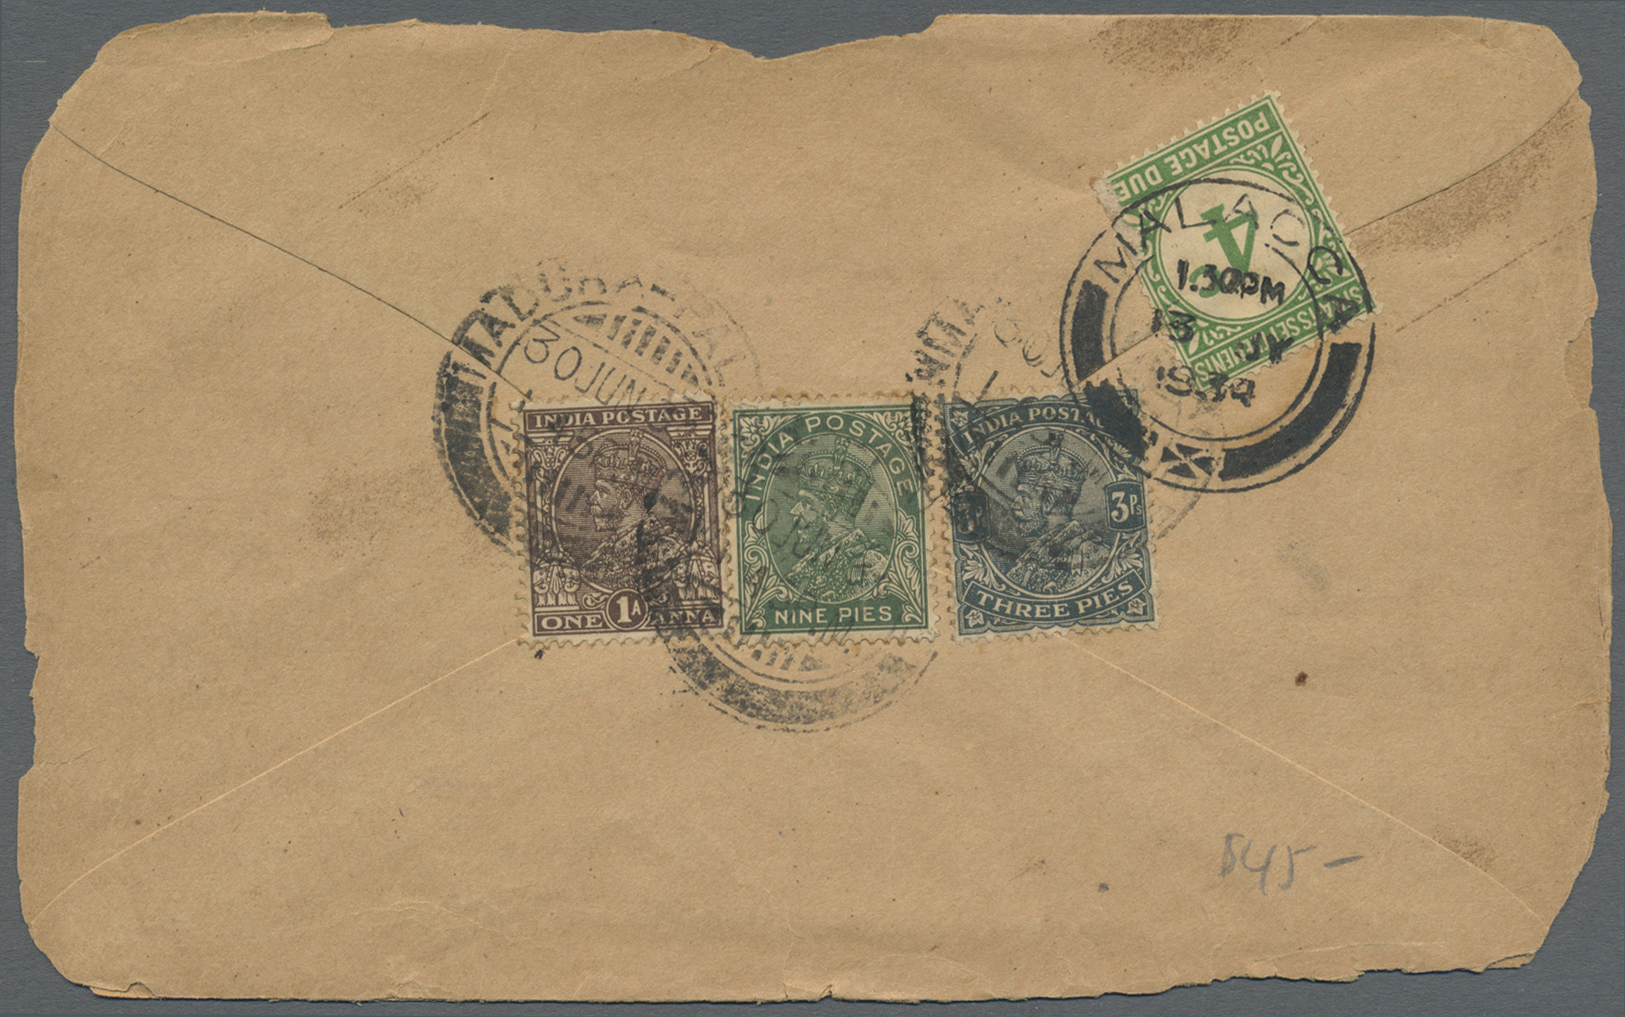 Br Malaiische Staaten - Straits Settlements - Portomarken: 1924-1936, Small Group Of 14 Taxed Covers From India To Malac - Straits Settlements